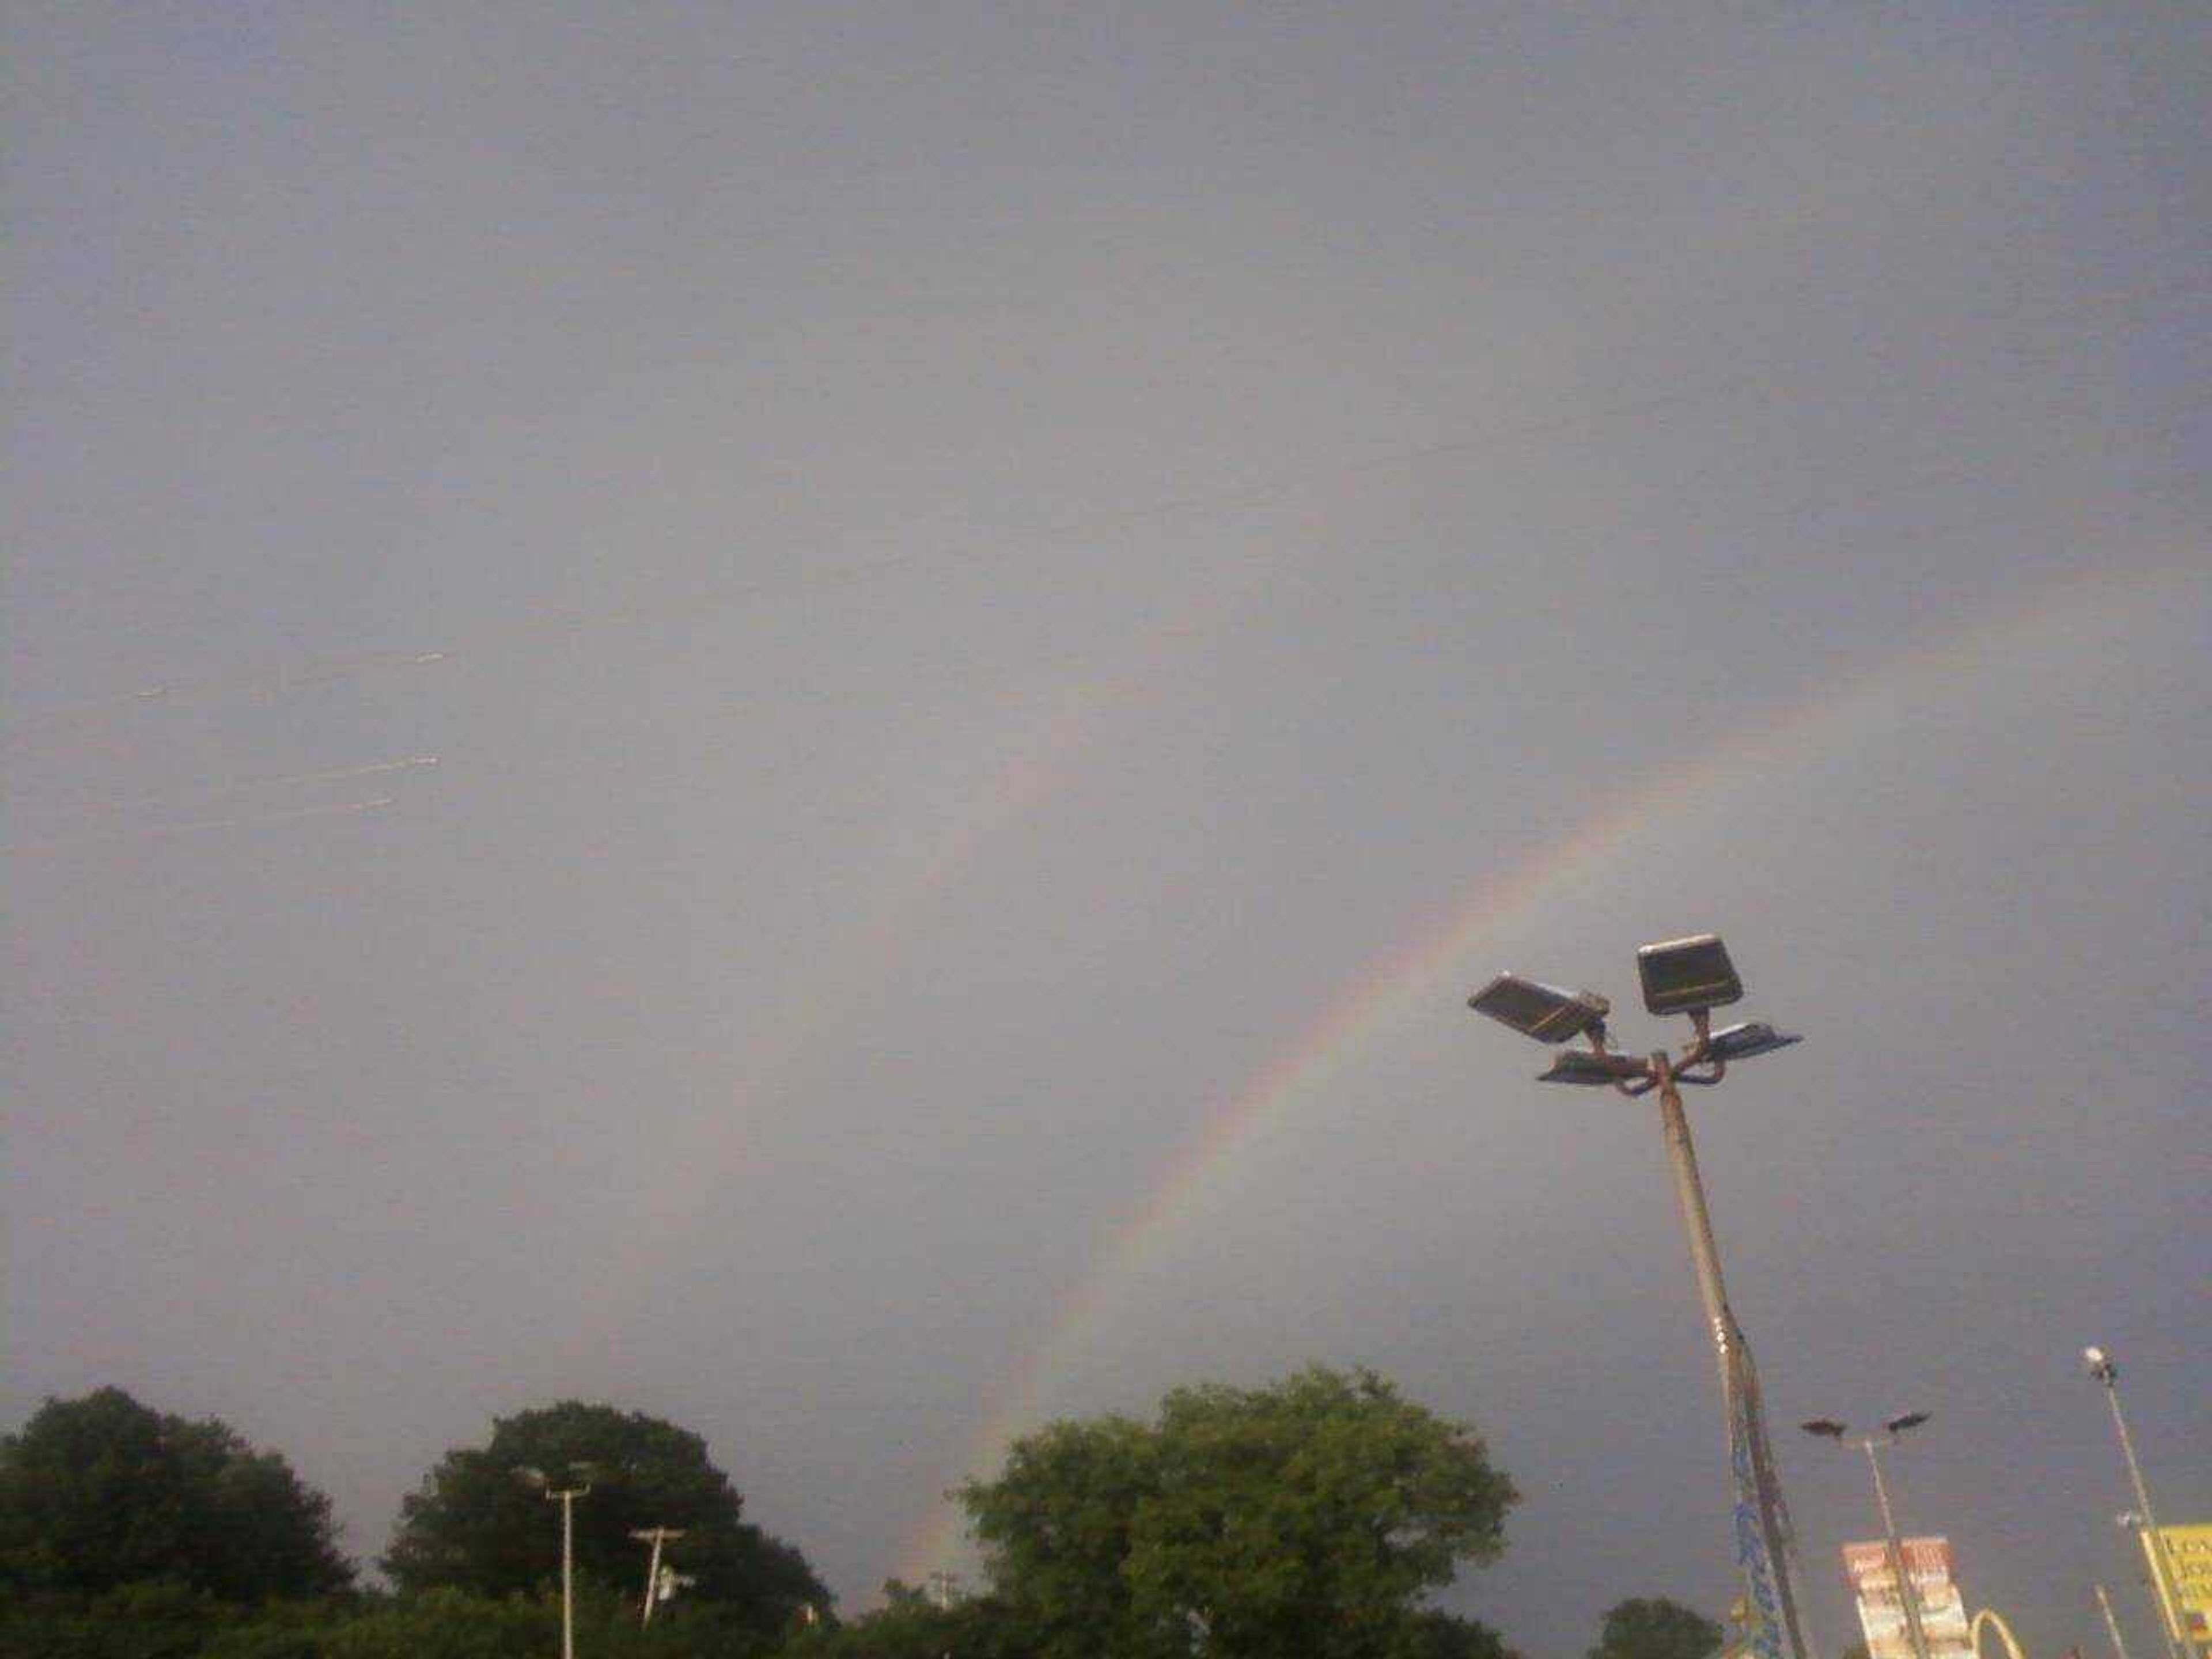 After constant downpour, it finally stopped. I saw a double rainbow after leaving a restaurant.